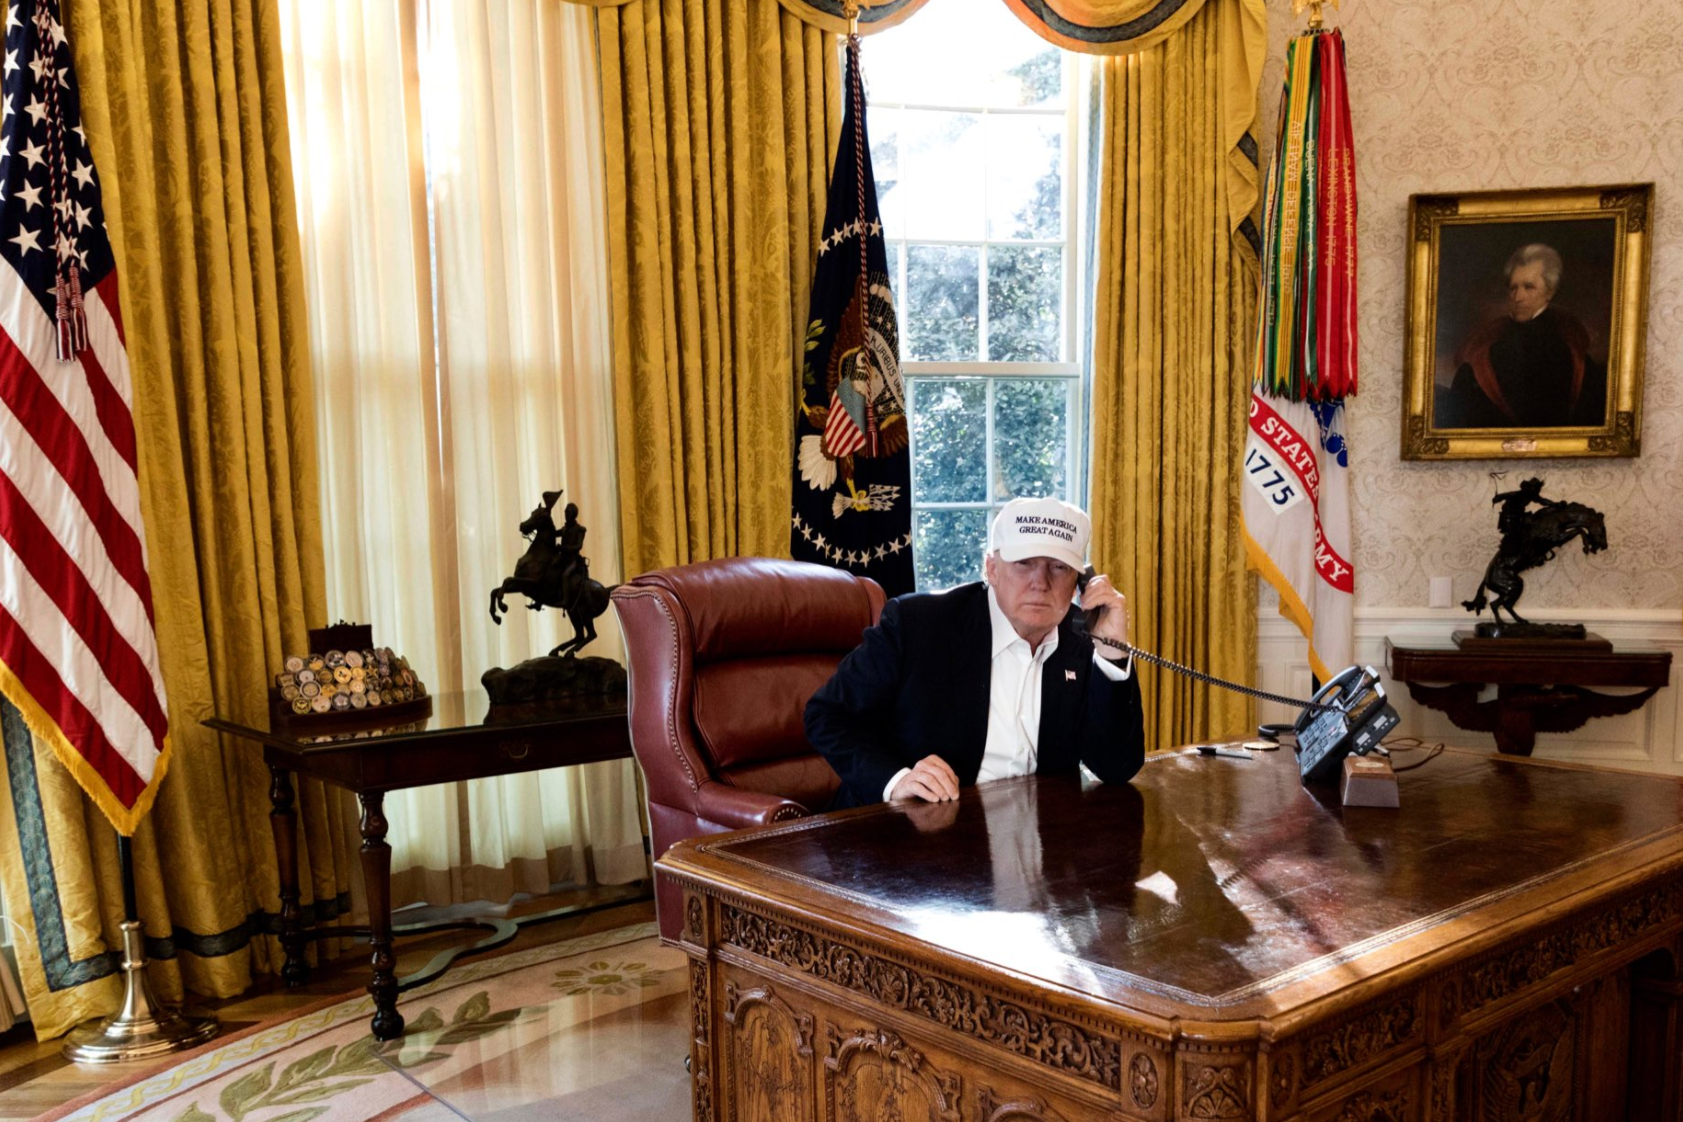 President Donald Trump is seen "working" in this photo released by the White House on Jan. 20, 2018.